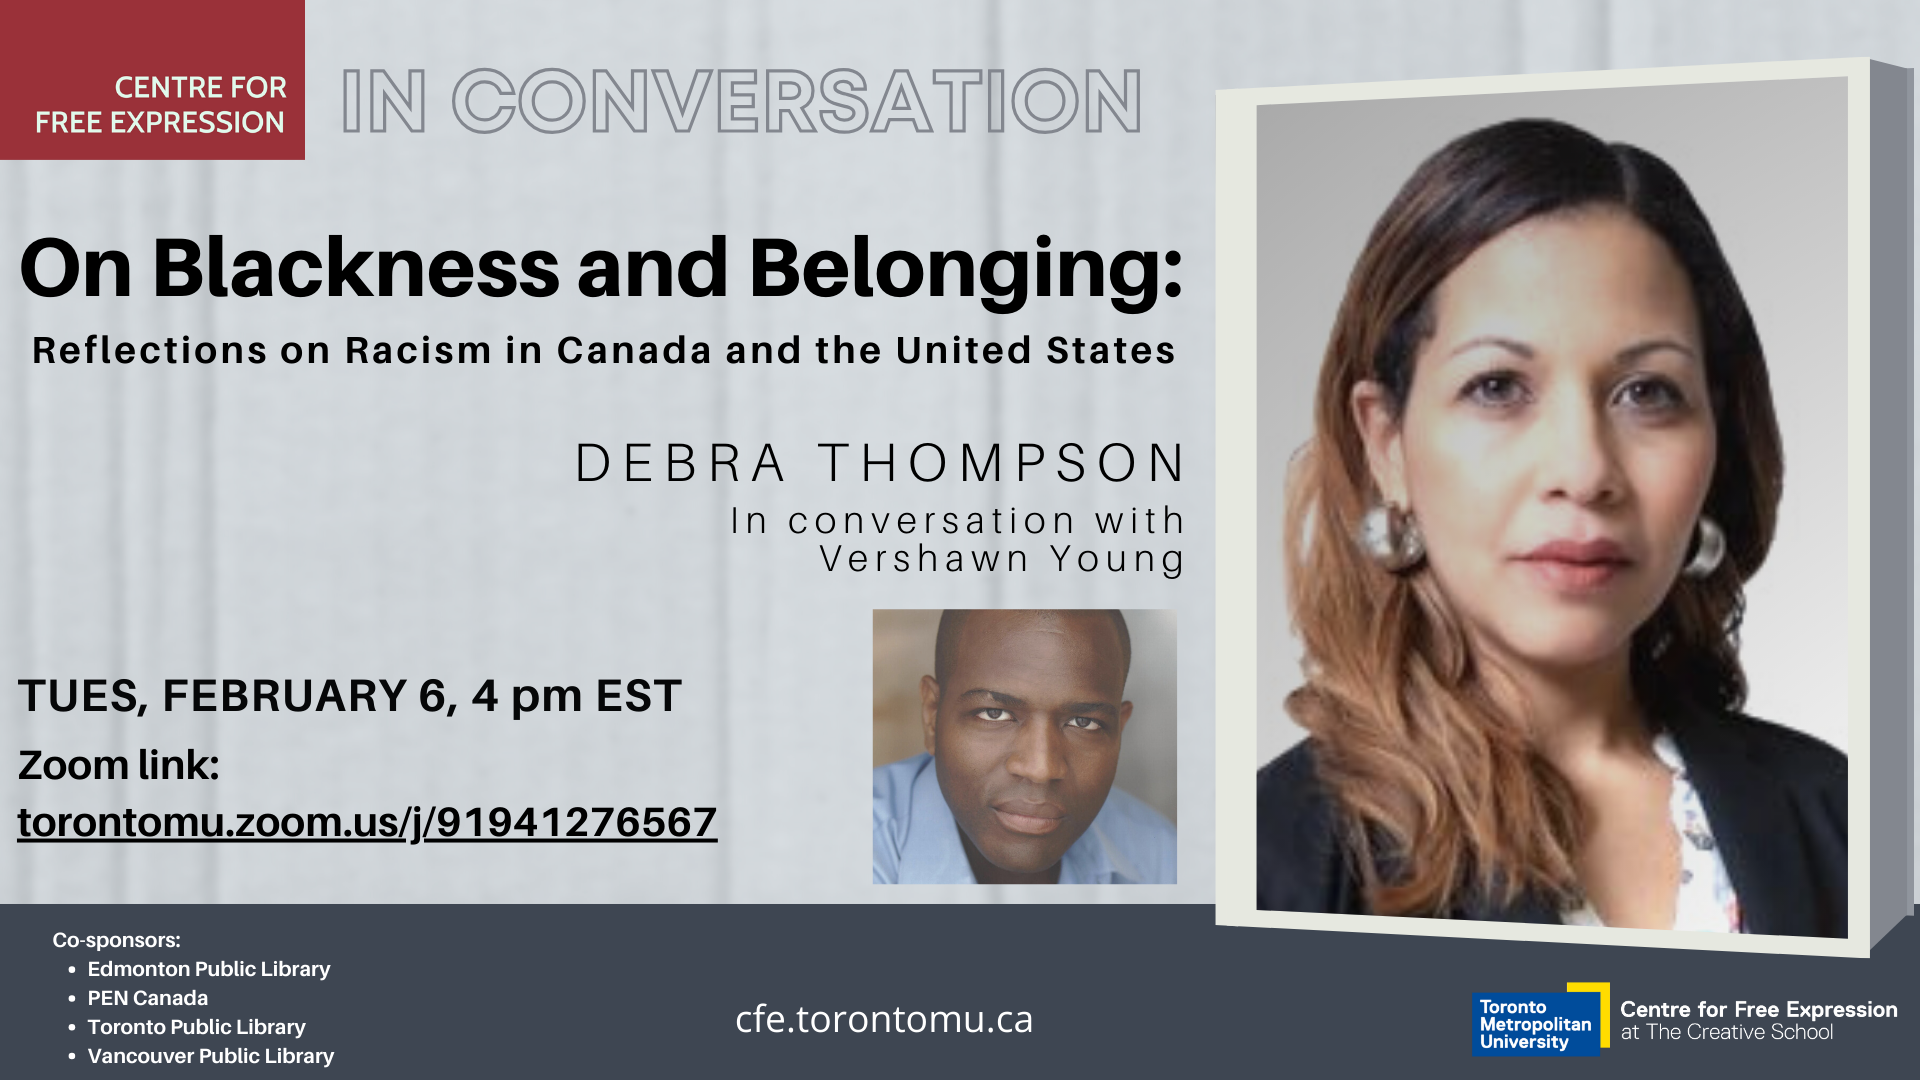 On Blackness and Belonging: Reflections on Racism in Canada and the United States